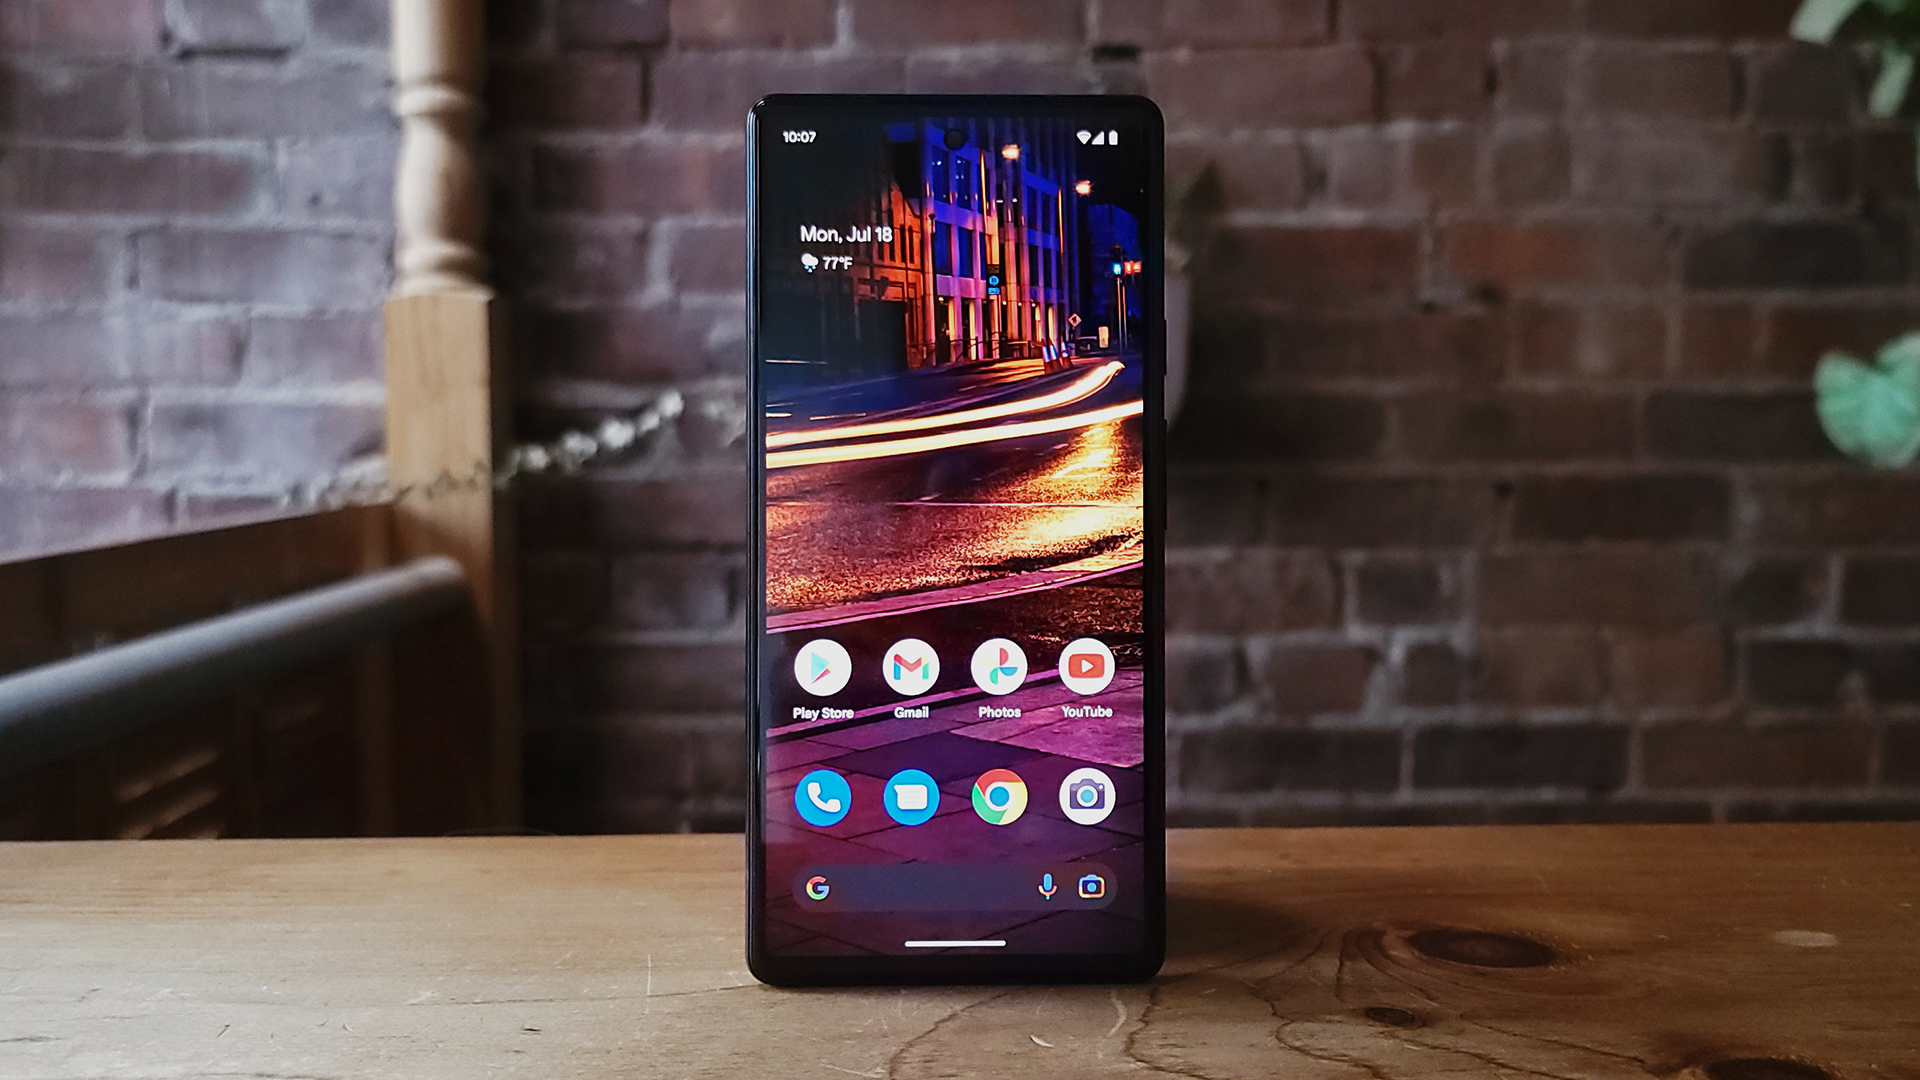 Wallpaper Wednesday: Android wallpapers 2022-07-20